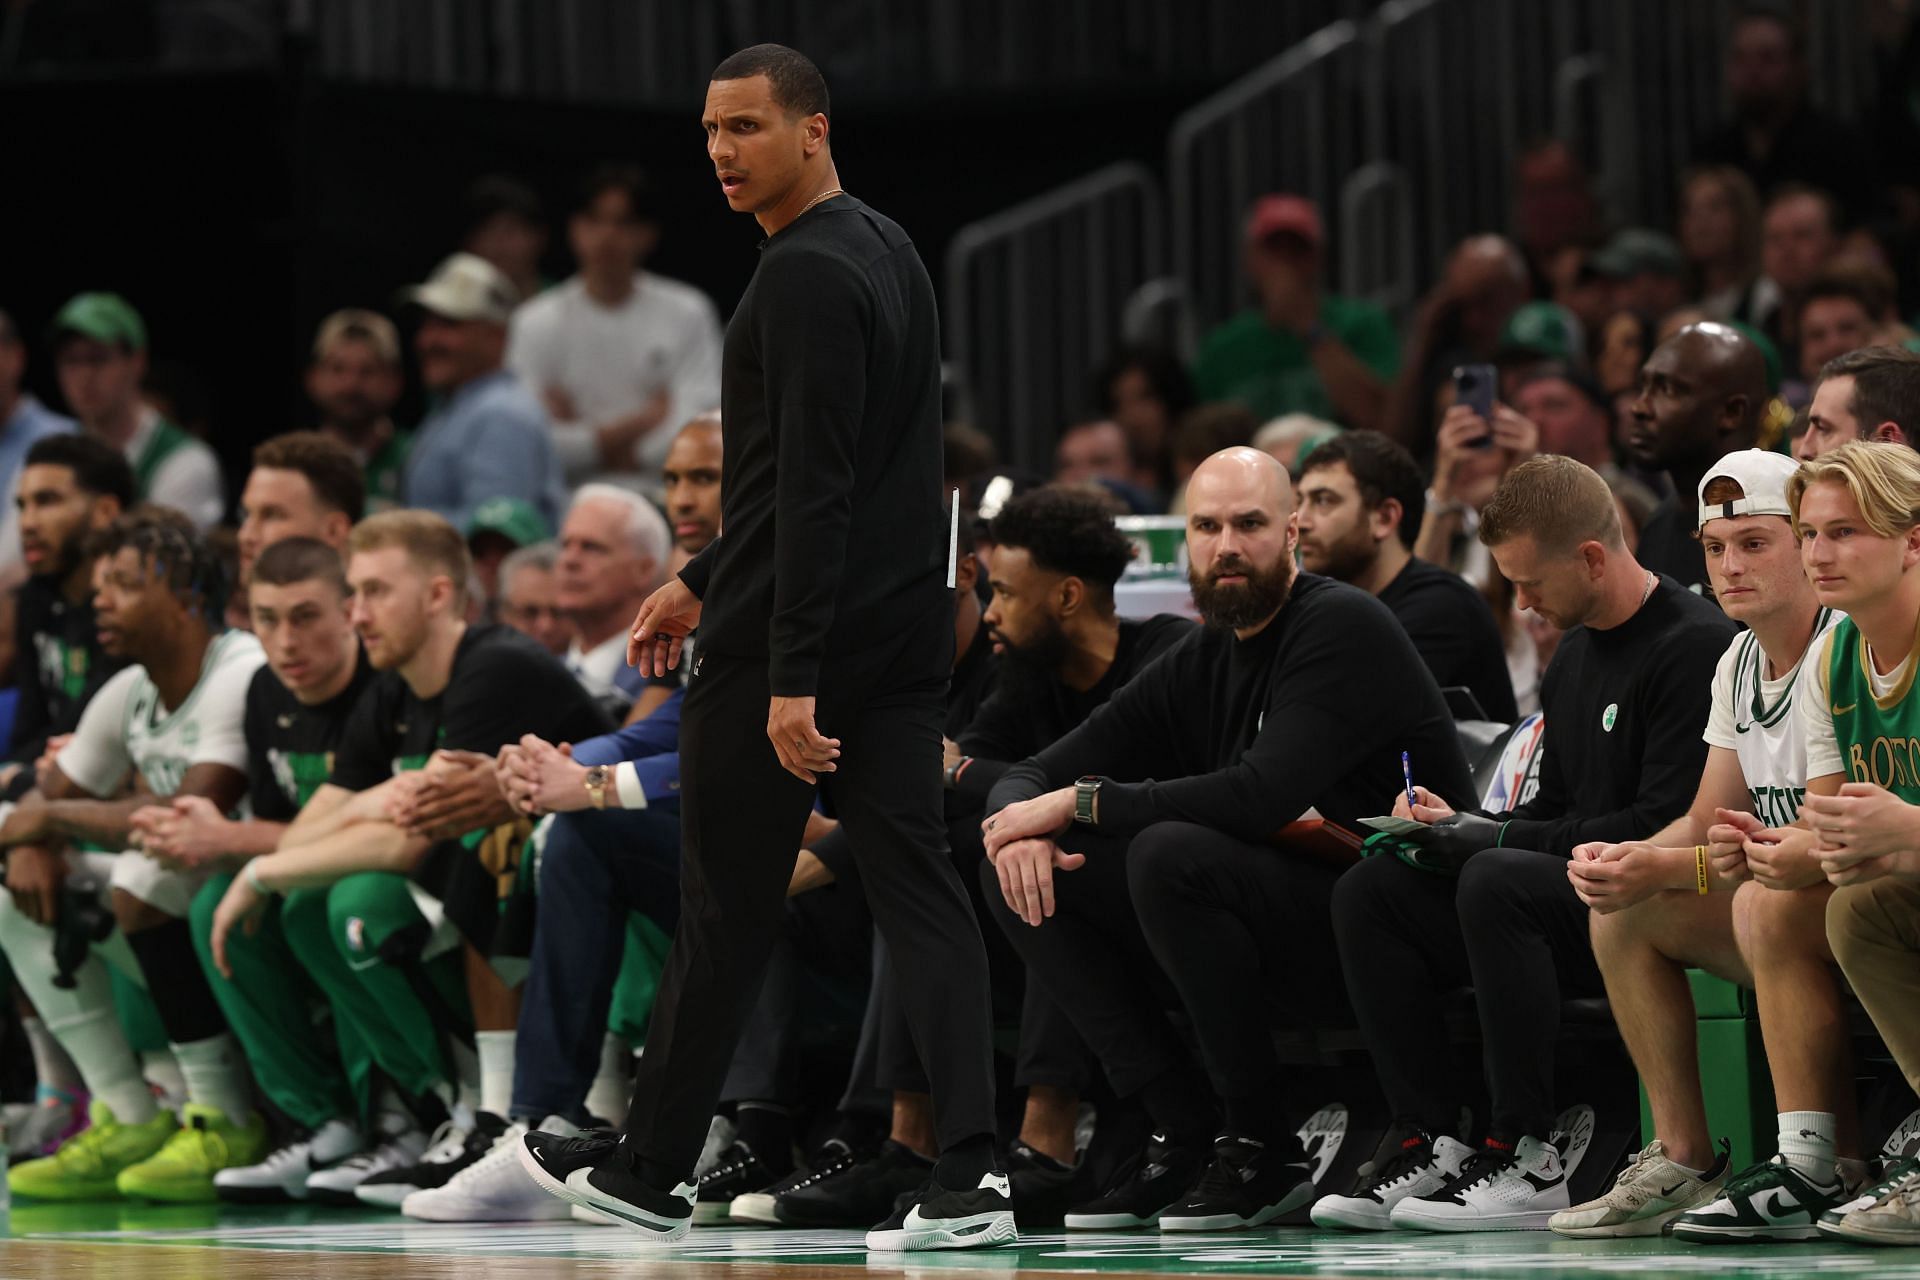 Who are on the Boston Celtics coaching staff? Finding out more